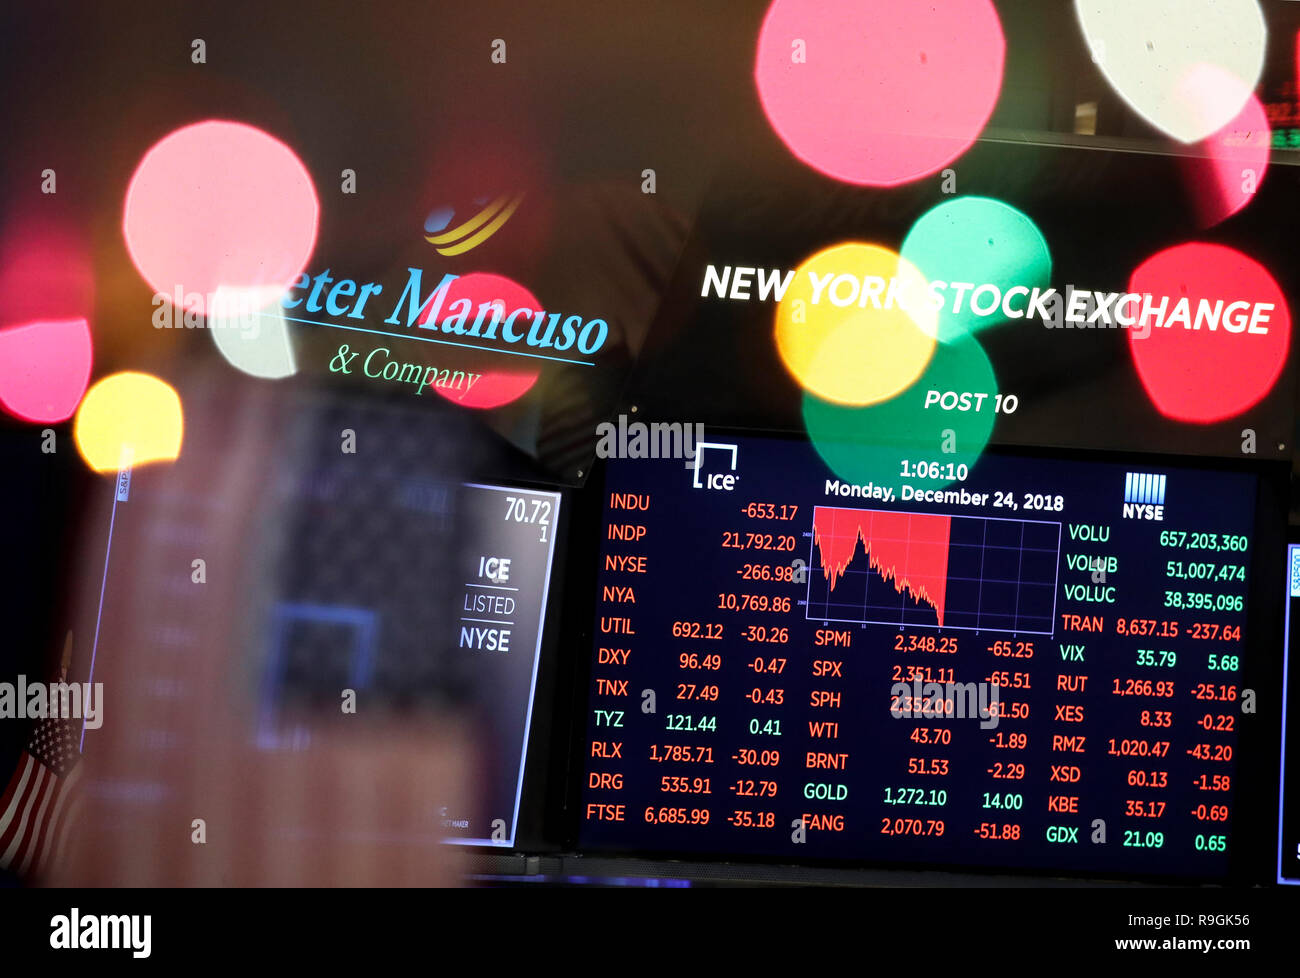 New York, USA. 24th Dec, 2018. The trading information is seen on an electronic screen at the New York Stock Exchange in New York, the United States, Dec. 24, 2018. U.S. stocks plunged on Monday, with most of the major indices booking their worst Christmas Eve decline, extending their huge losses in the previous week's rout. The Dow Jones Industrial Average slumped 653.17 points, or 2.91 percent, to 21792.20. The S&P 500 decreased 65.52 points, or 2.71 percent, to 2,351.10. The Nasdaq Composite Index slid 140.08 points, or 2.21 percent, to 6,192.92. Credit: Wang Ying/Xinhua/Alamy Live News Stock Photo